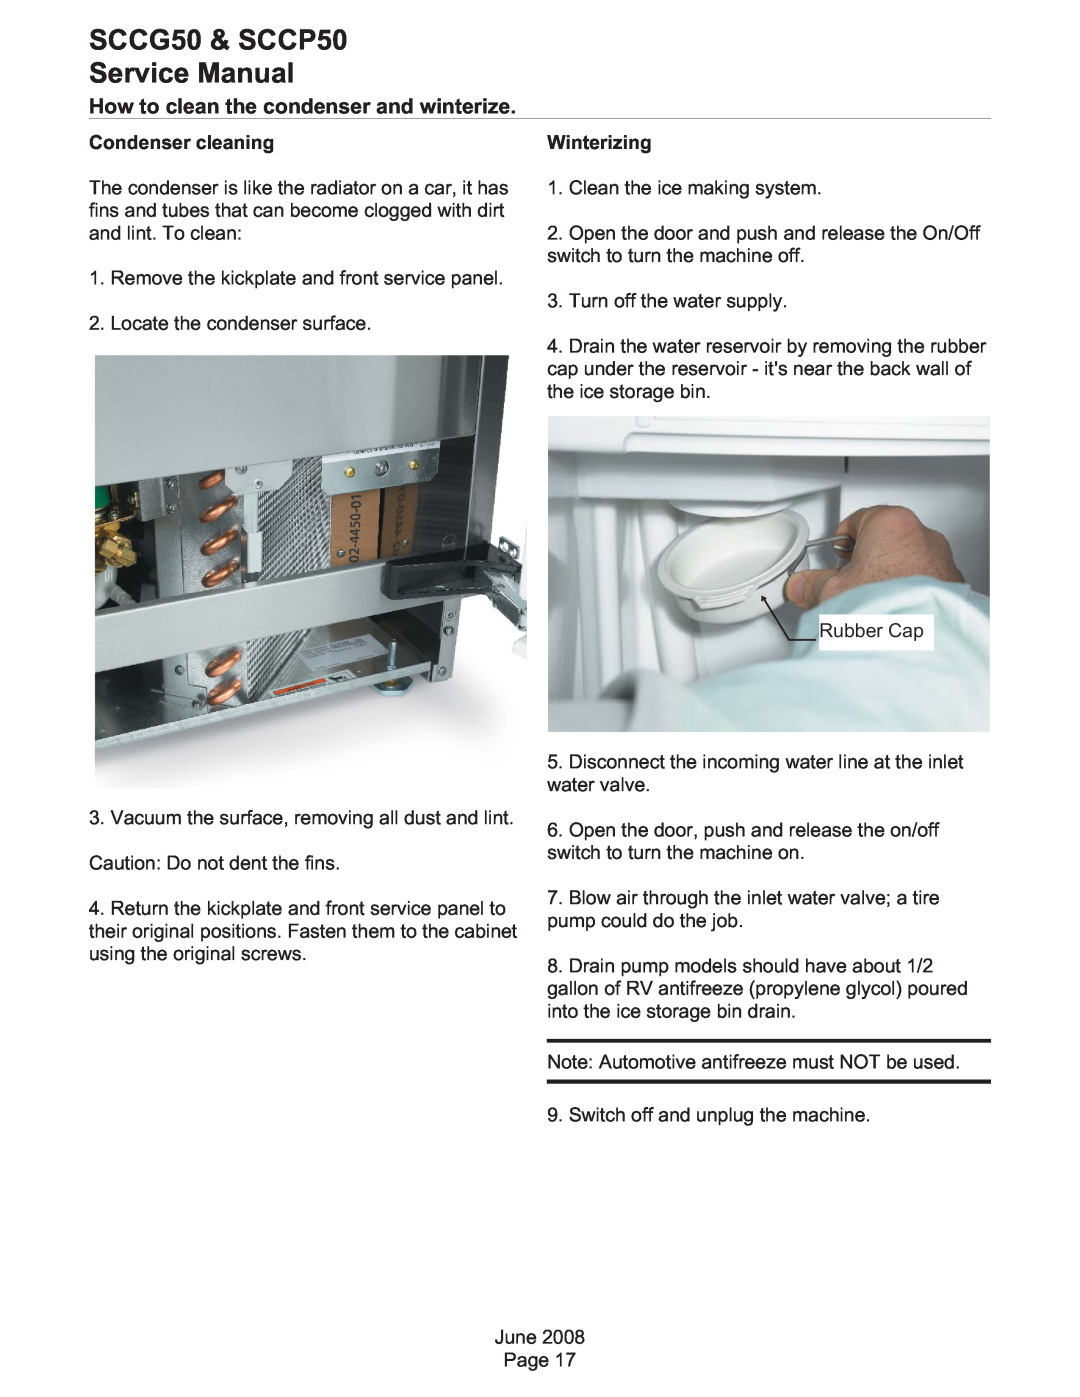 Scotsman Ice SCCP50, SCCG50 service manual How to clean the condenser and winterize, Condenser cleaning 